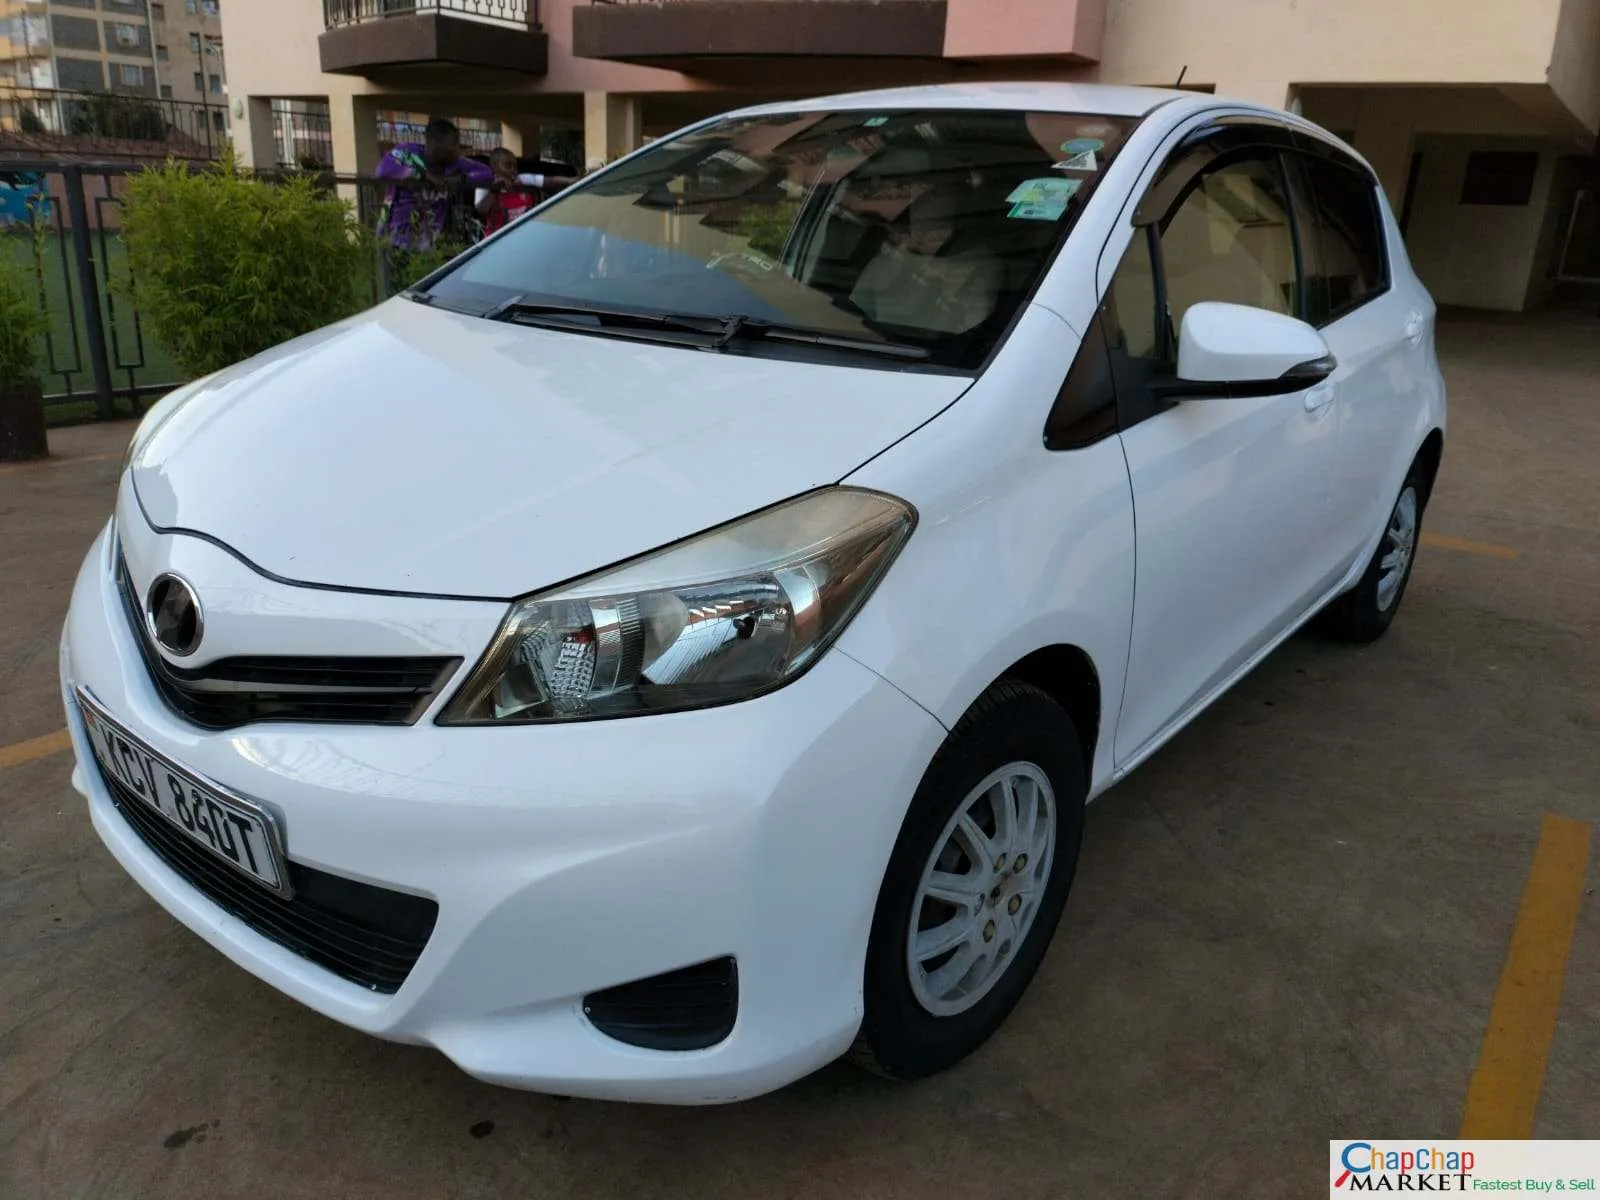 Toyota Vitz kenya 1300cc You Pay 30% Deposit Trade in OK EXCLUSIVE vitz for sale in kenya hire purchase installments 🔥